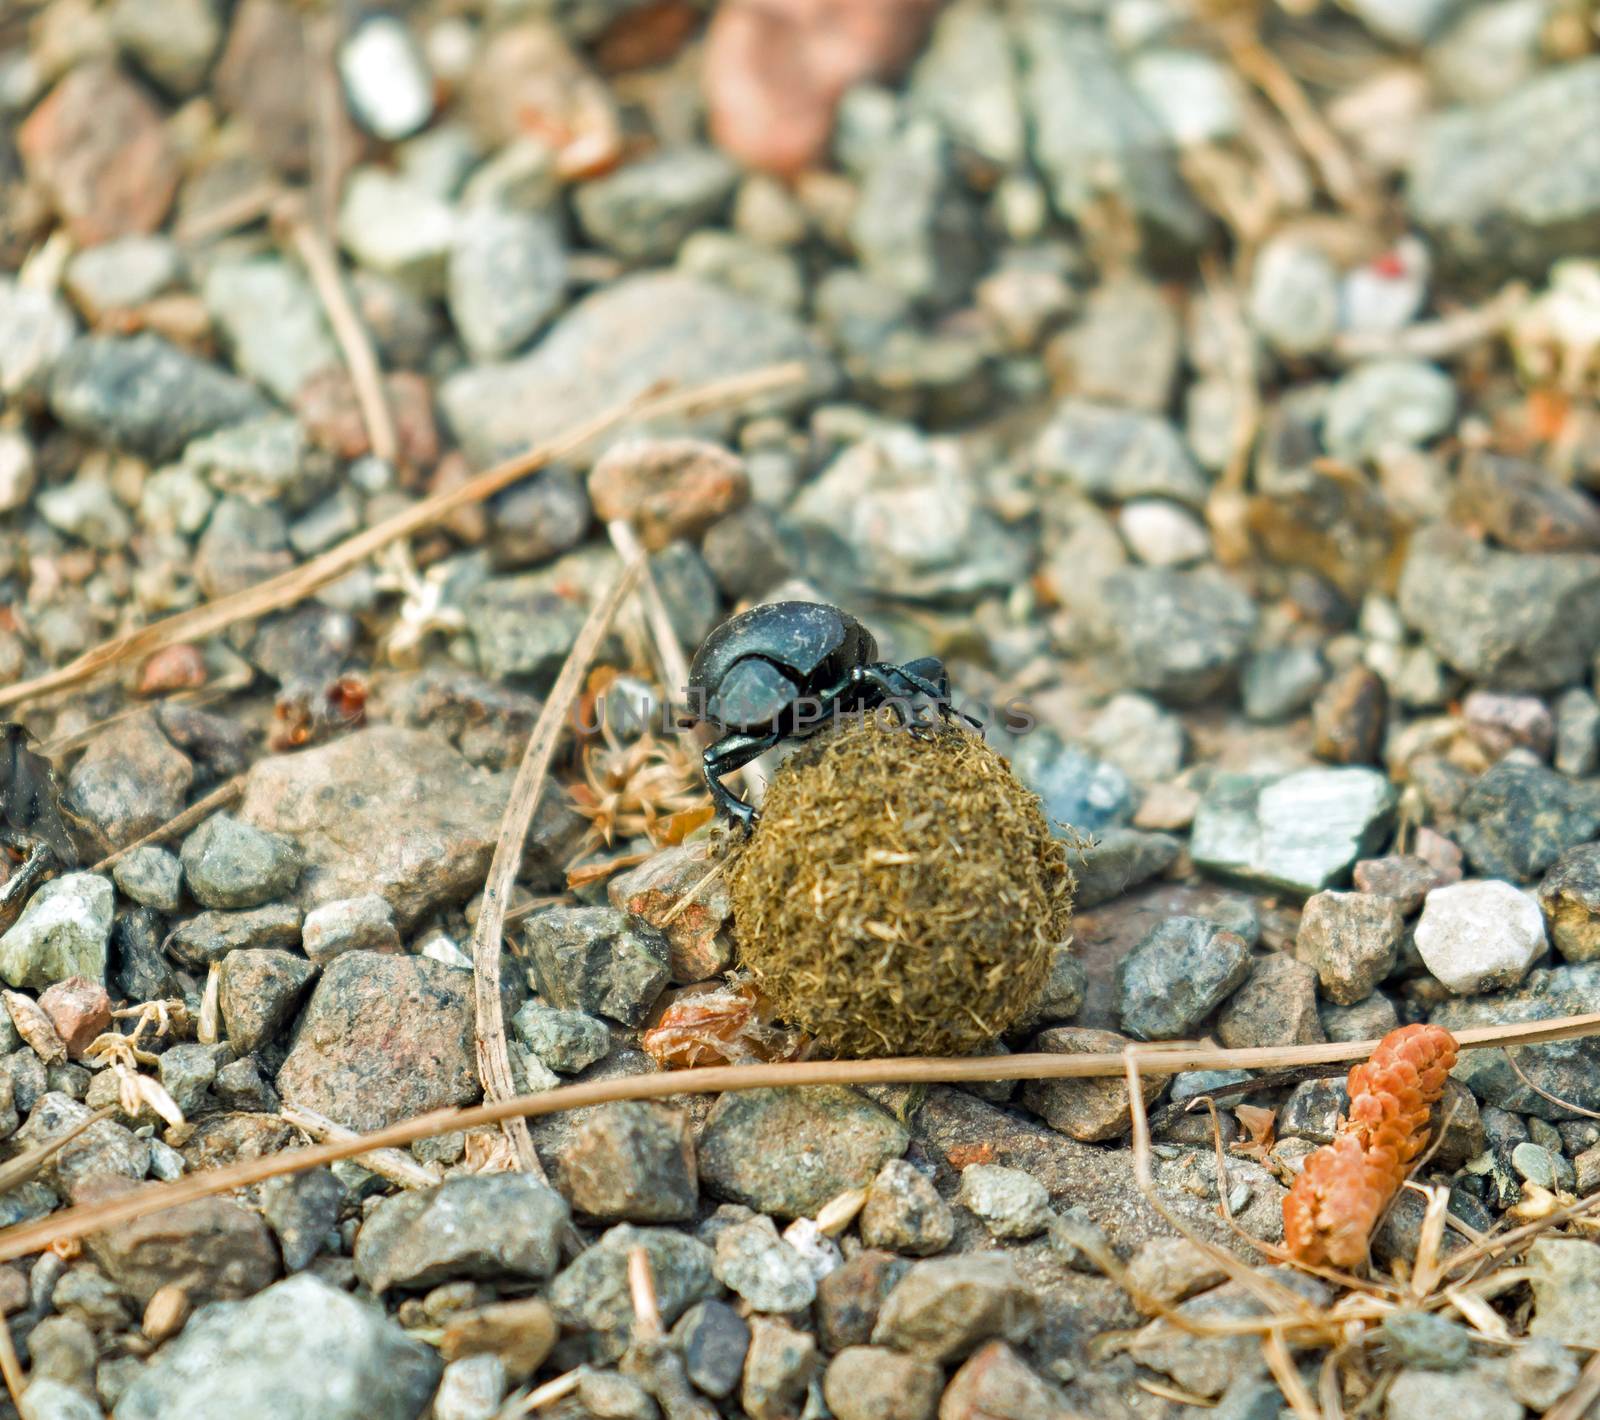 Male Dung Beetle with ball of dung